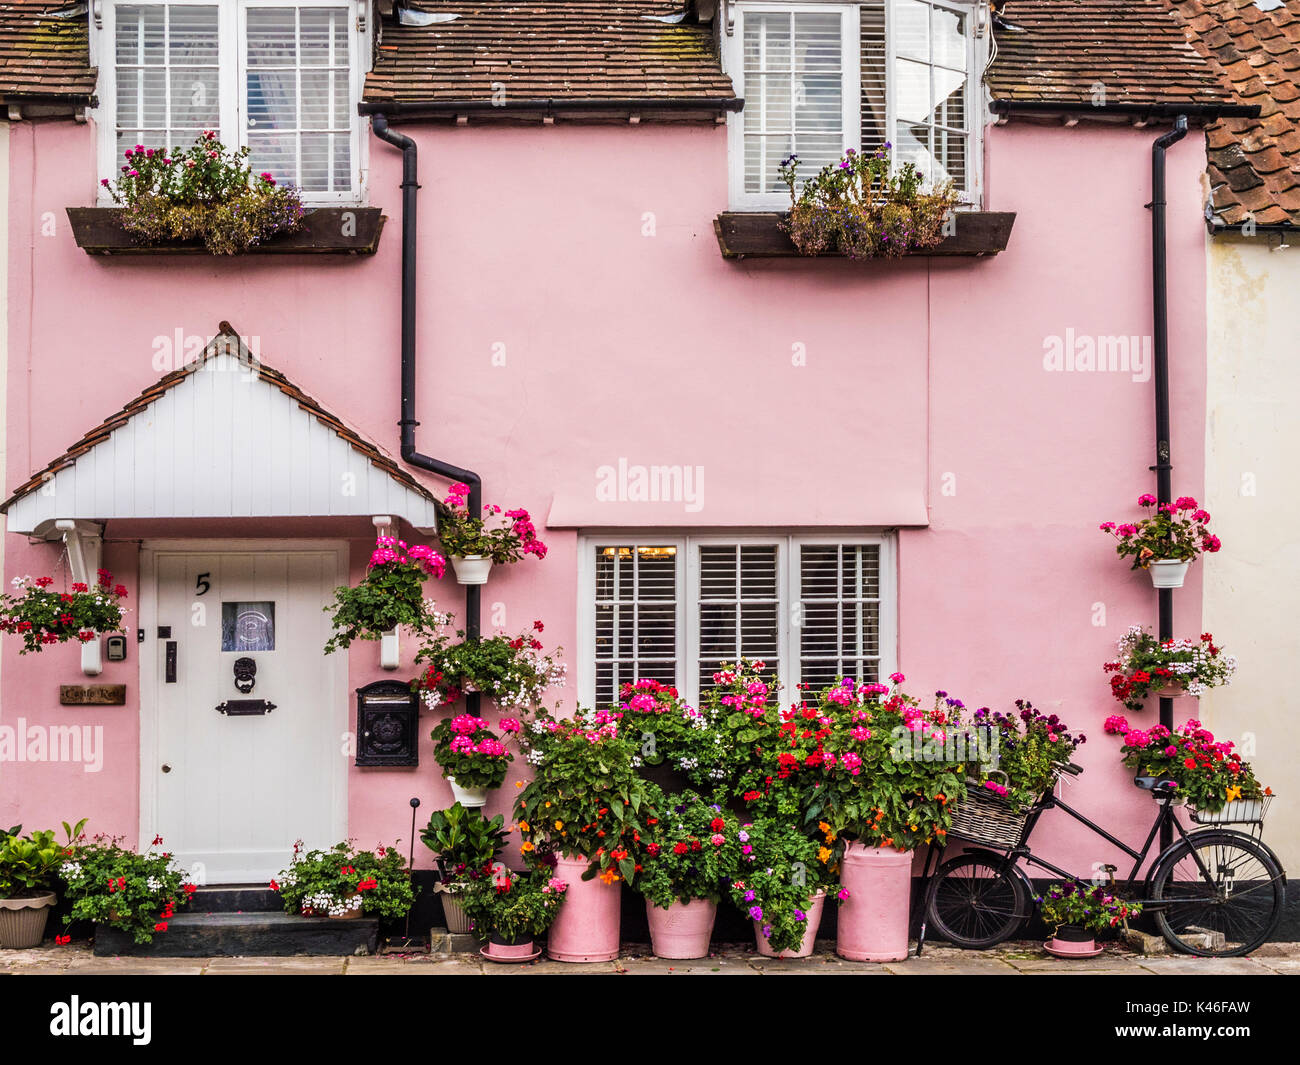 A pink house with colourful flowers in Dunster High Street near Minehead, Somerset. Stock Photo